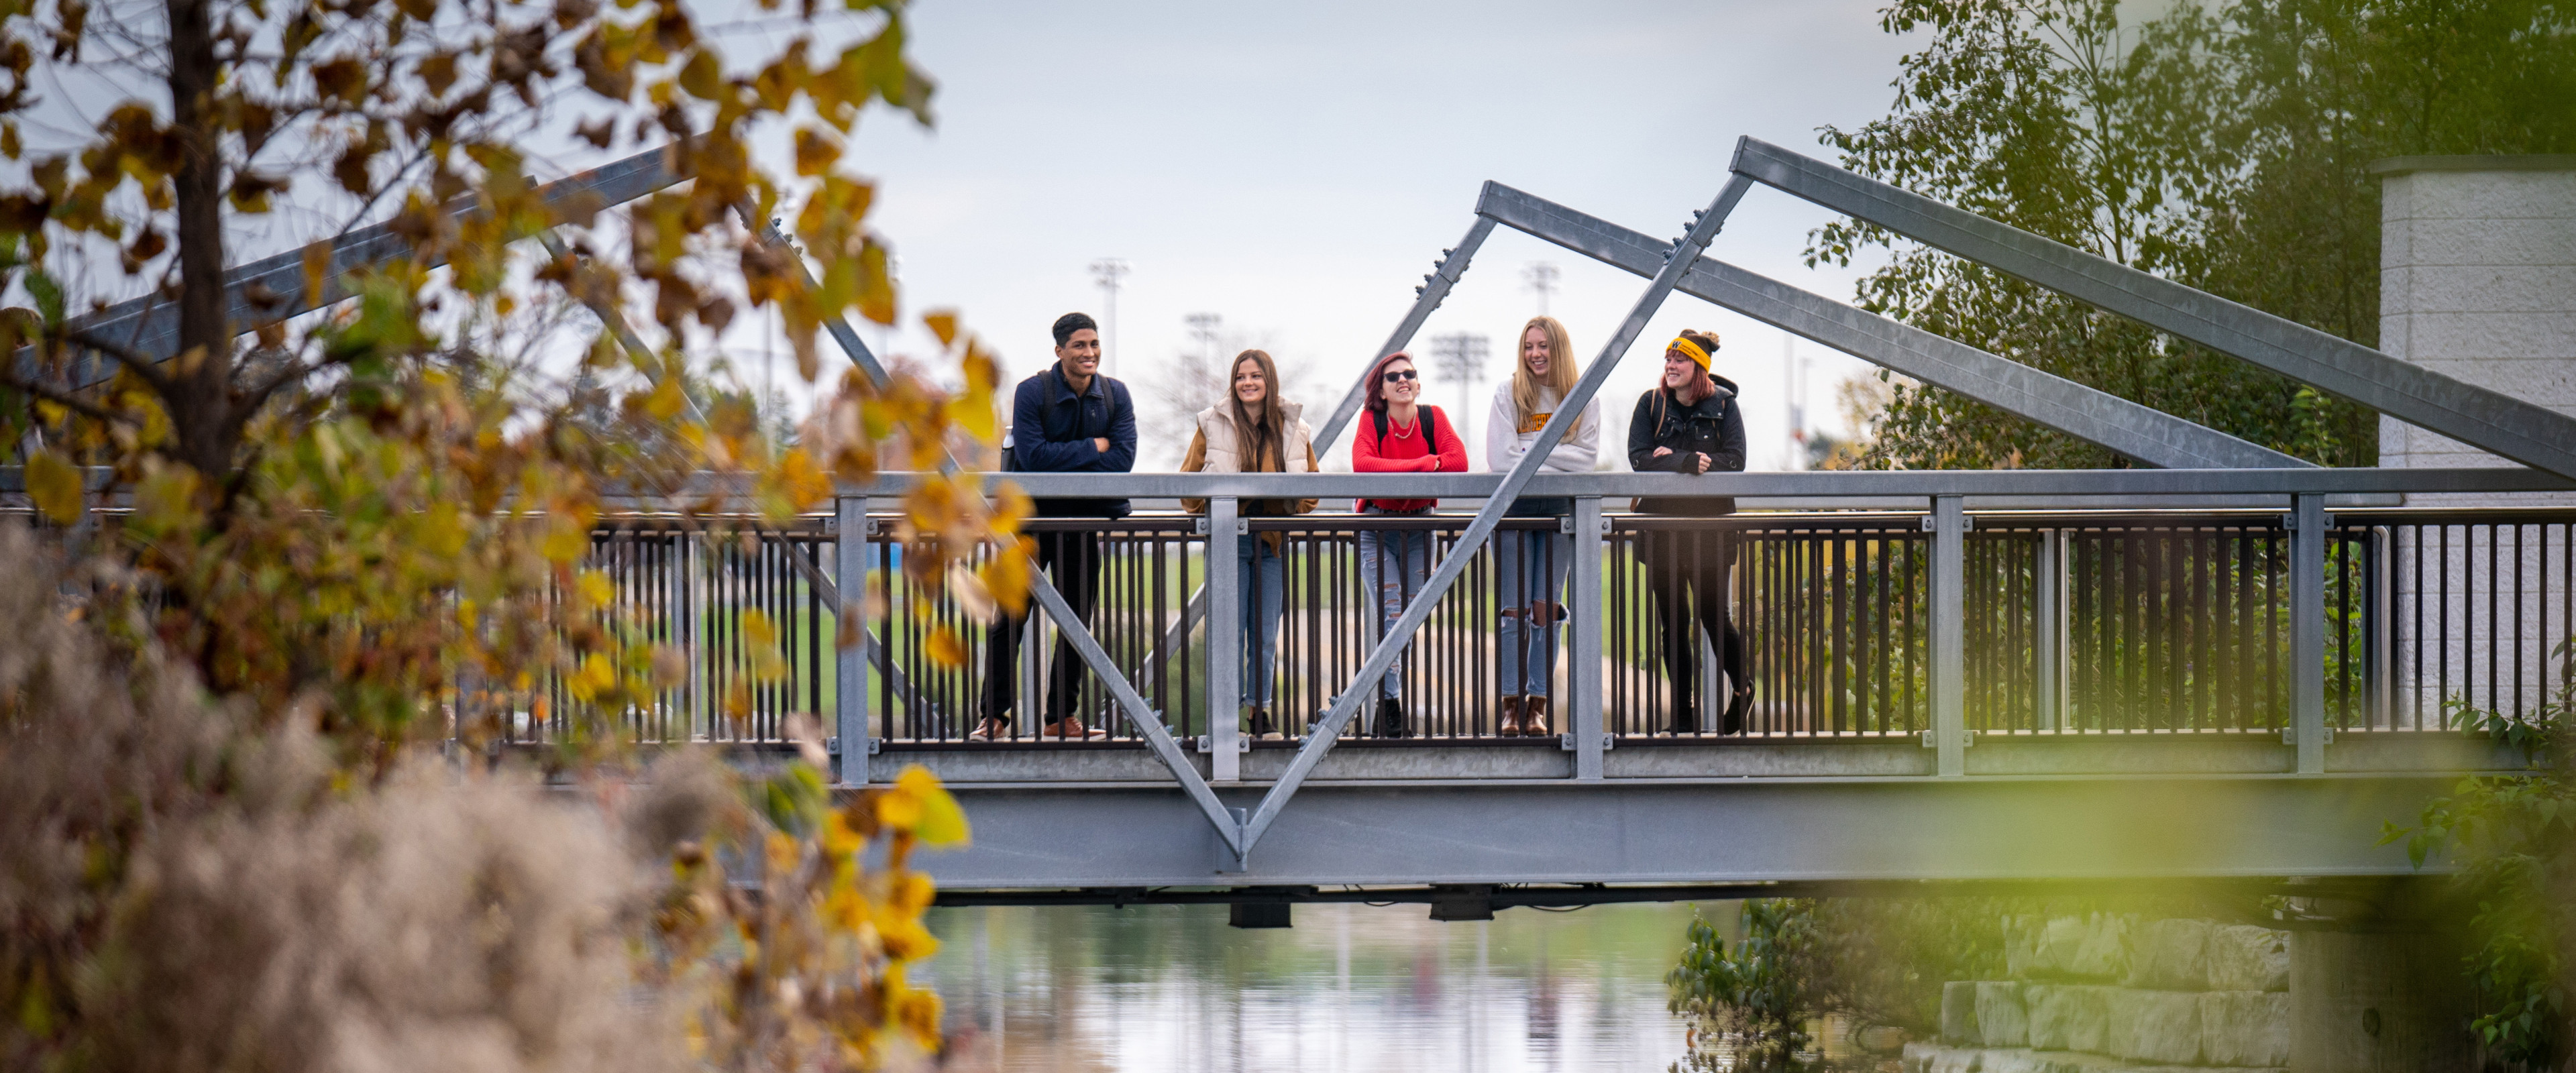 Students standing on the bridge at Goldworth Valley Pond.